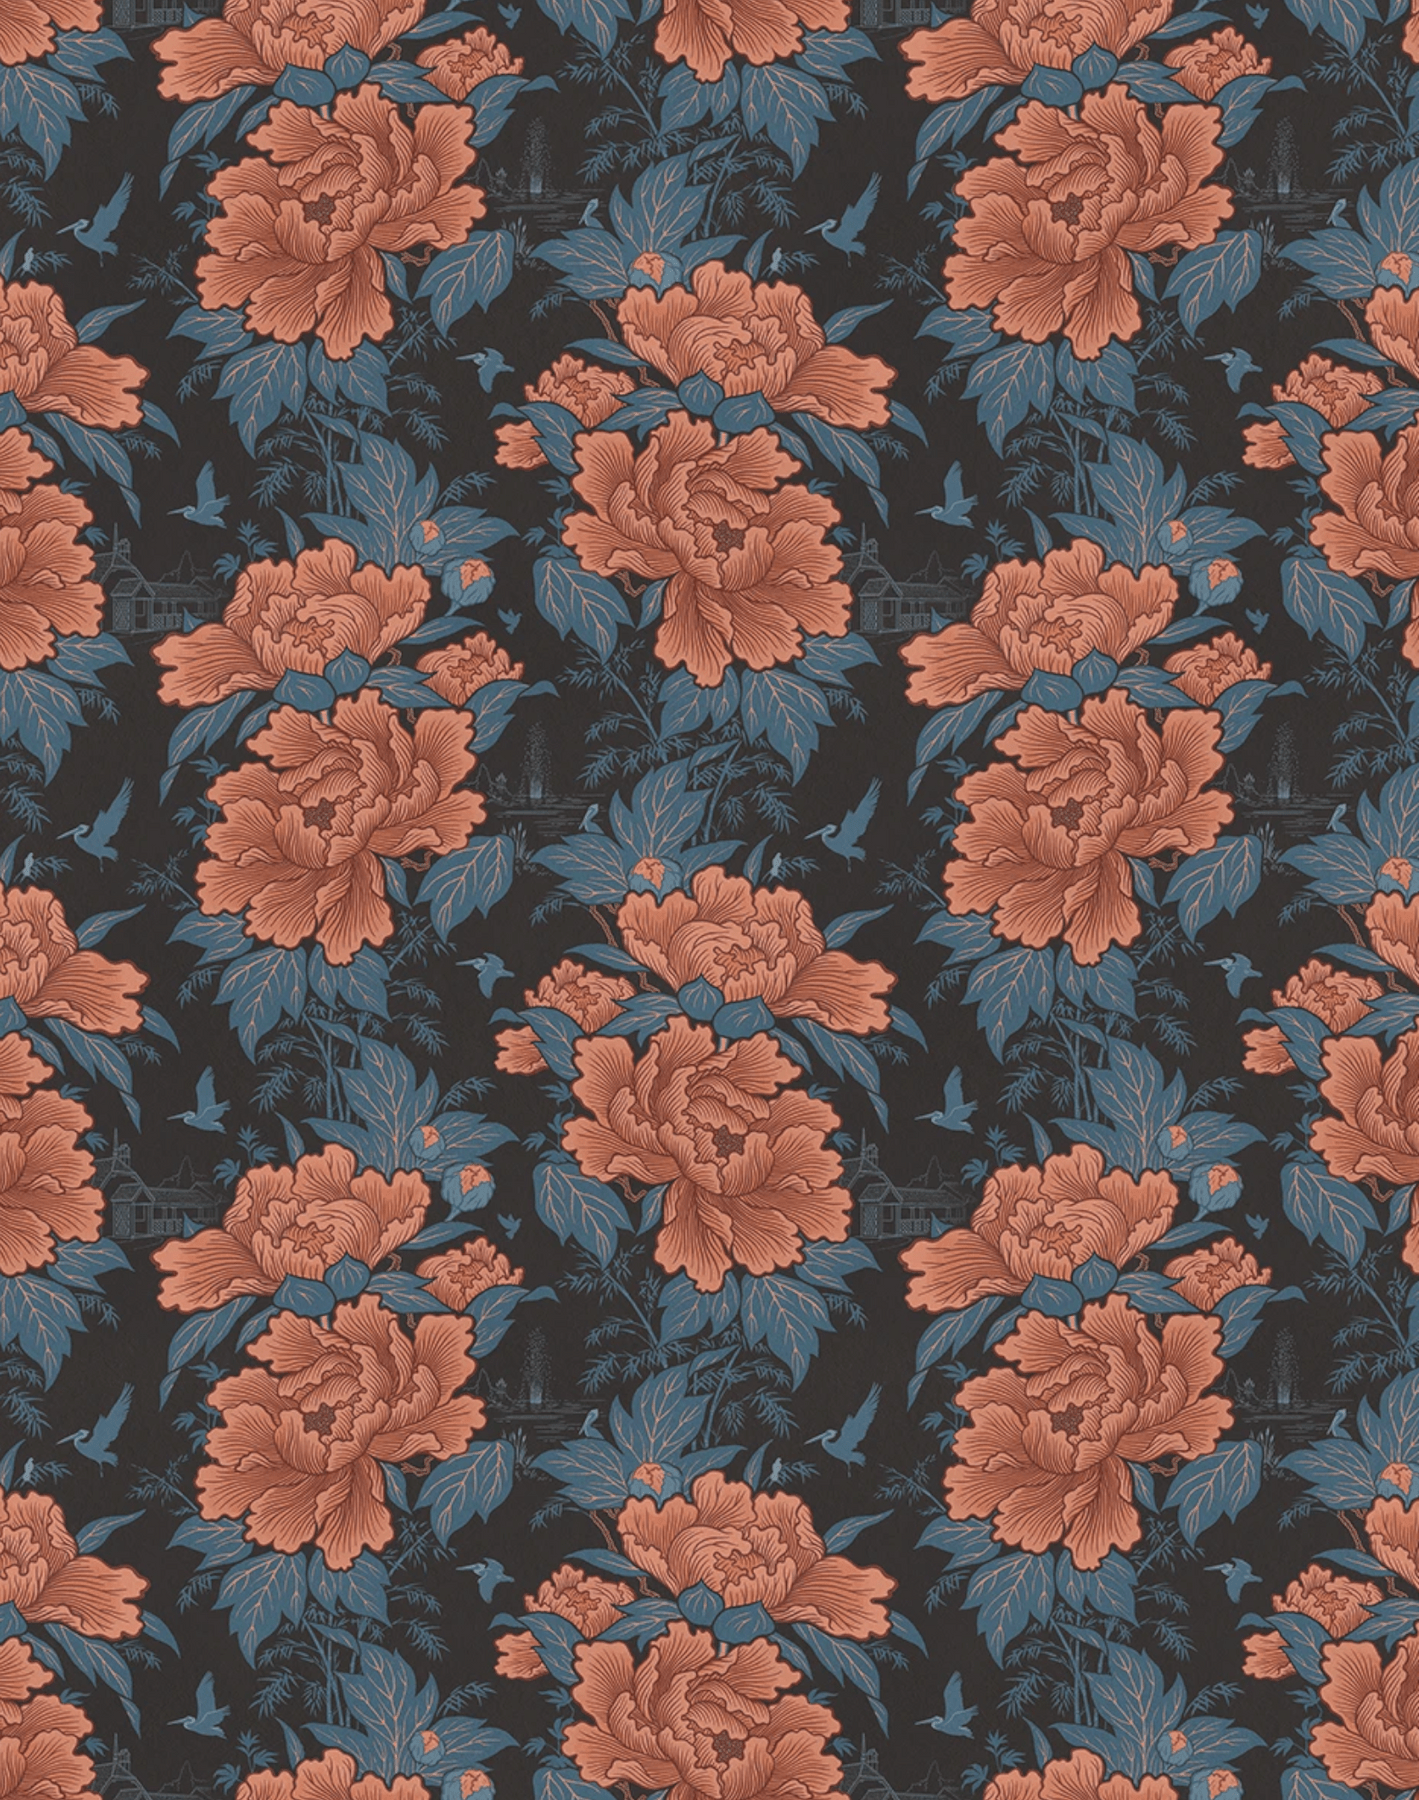 A floral pattern with orange flowers on a black background - Coral